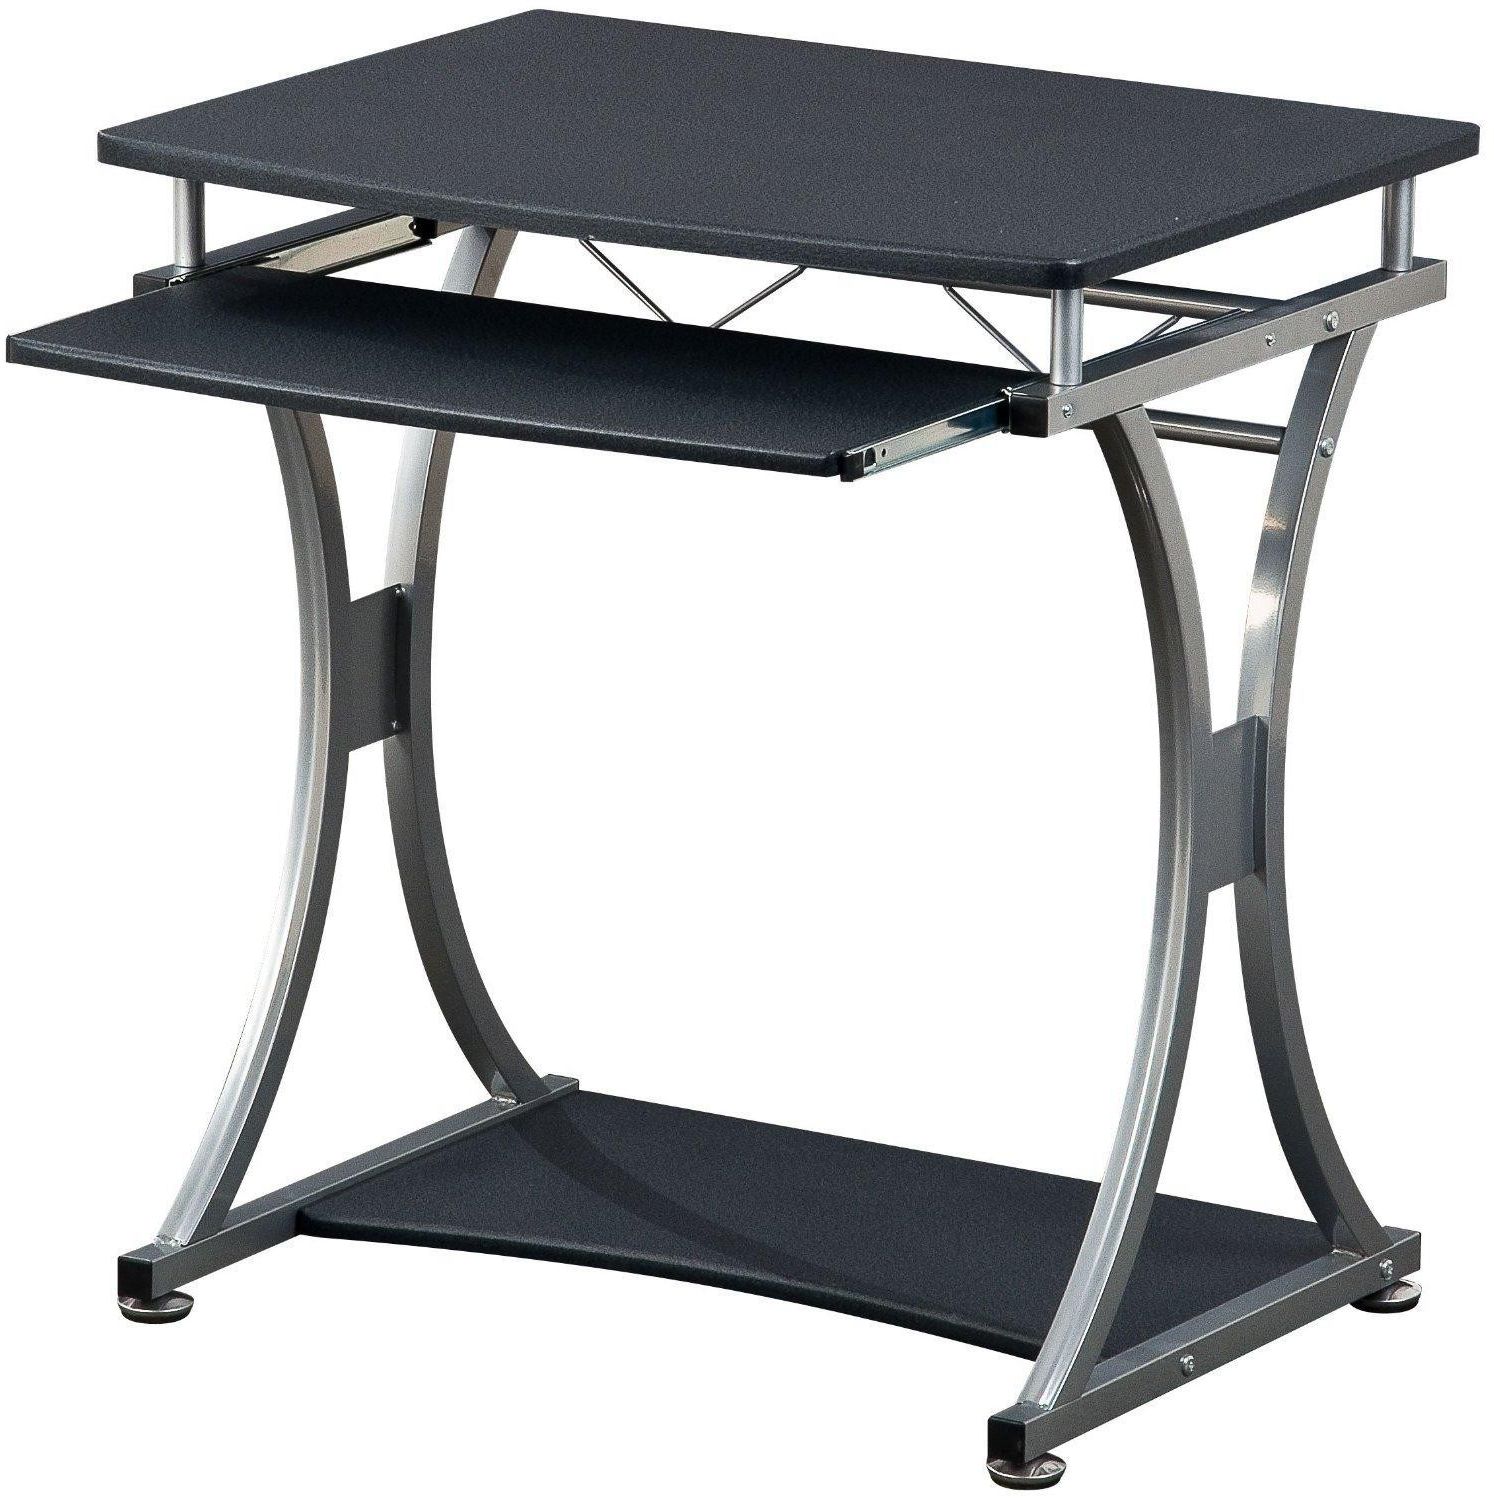 Compact Desk For Pc With Removable Tray, Black Graphite – Computer Pertaining To Most Current Graphite Convertible Desks With Keyboard Shelf (View 6 of 15)